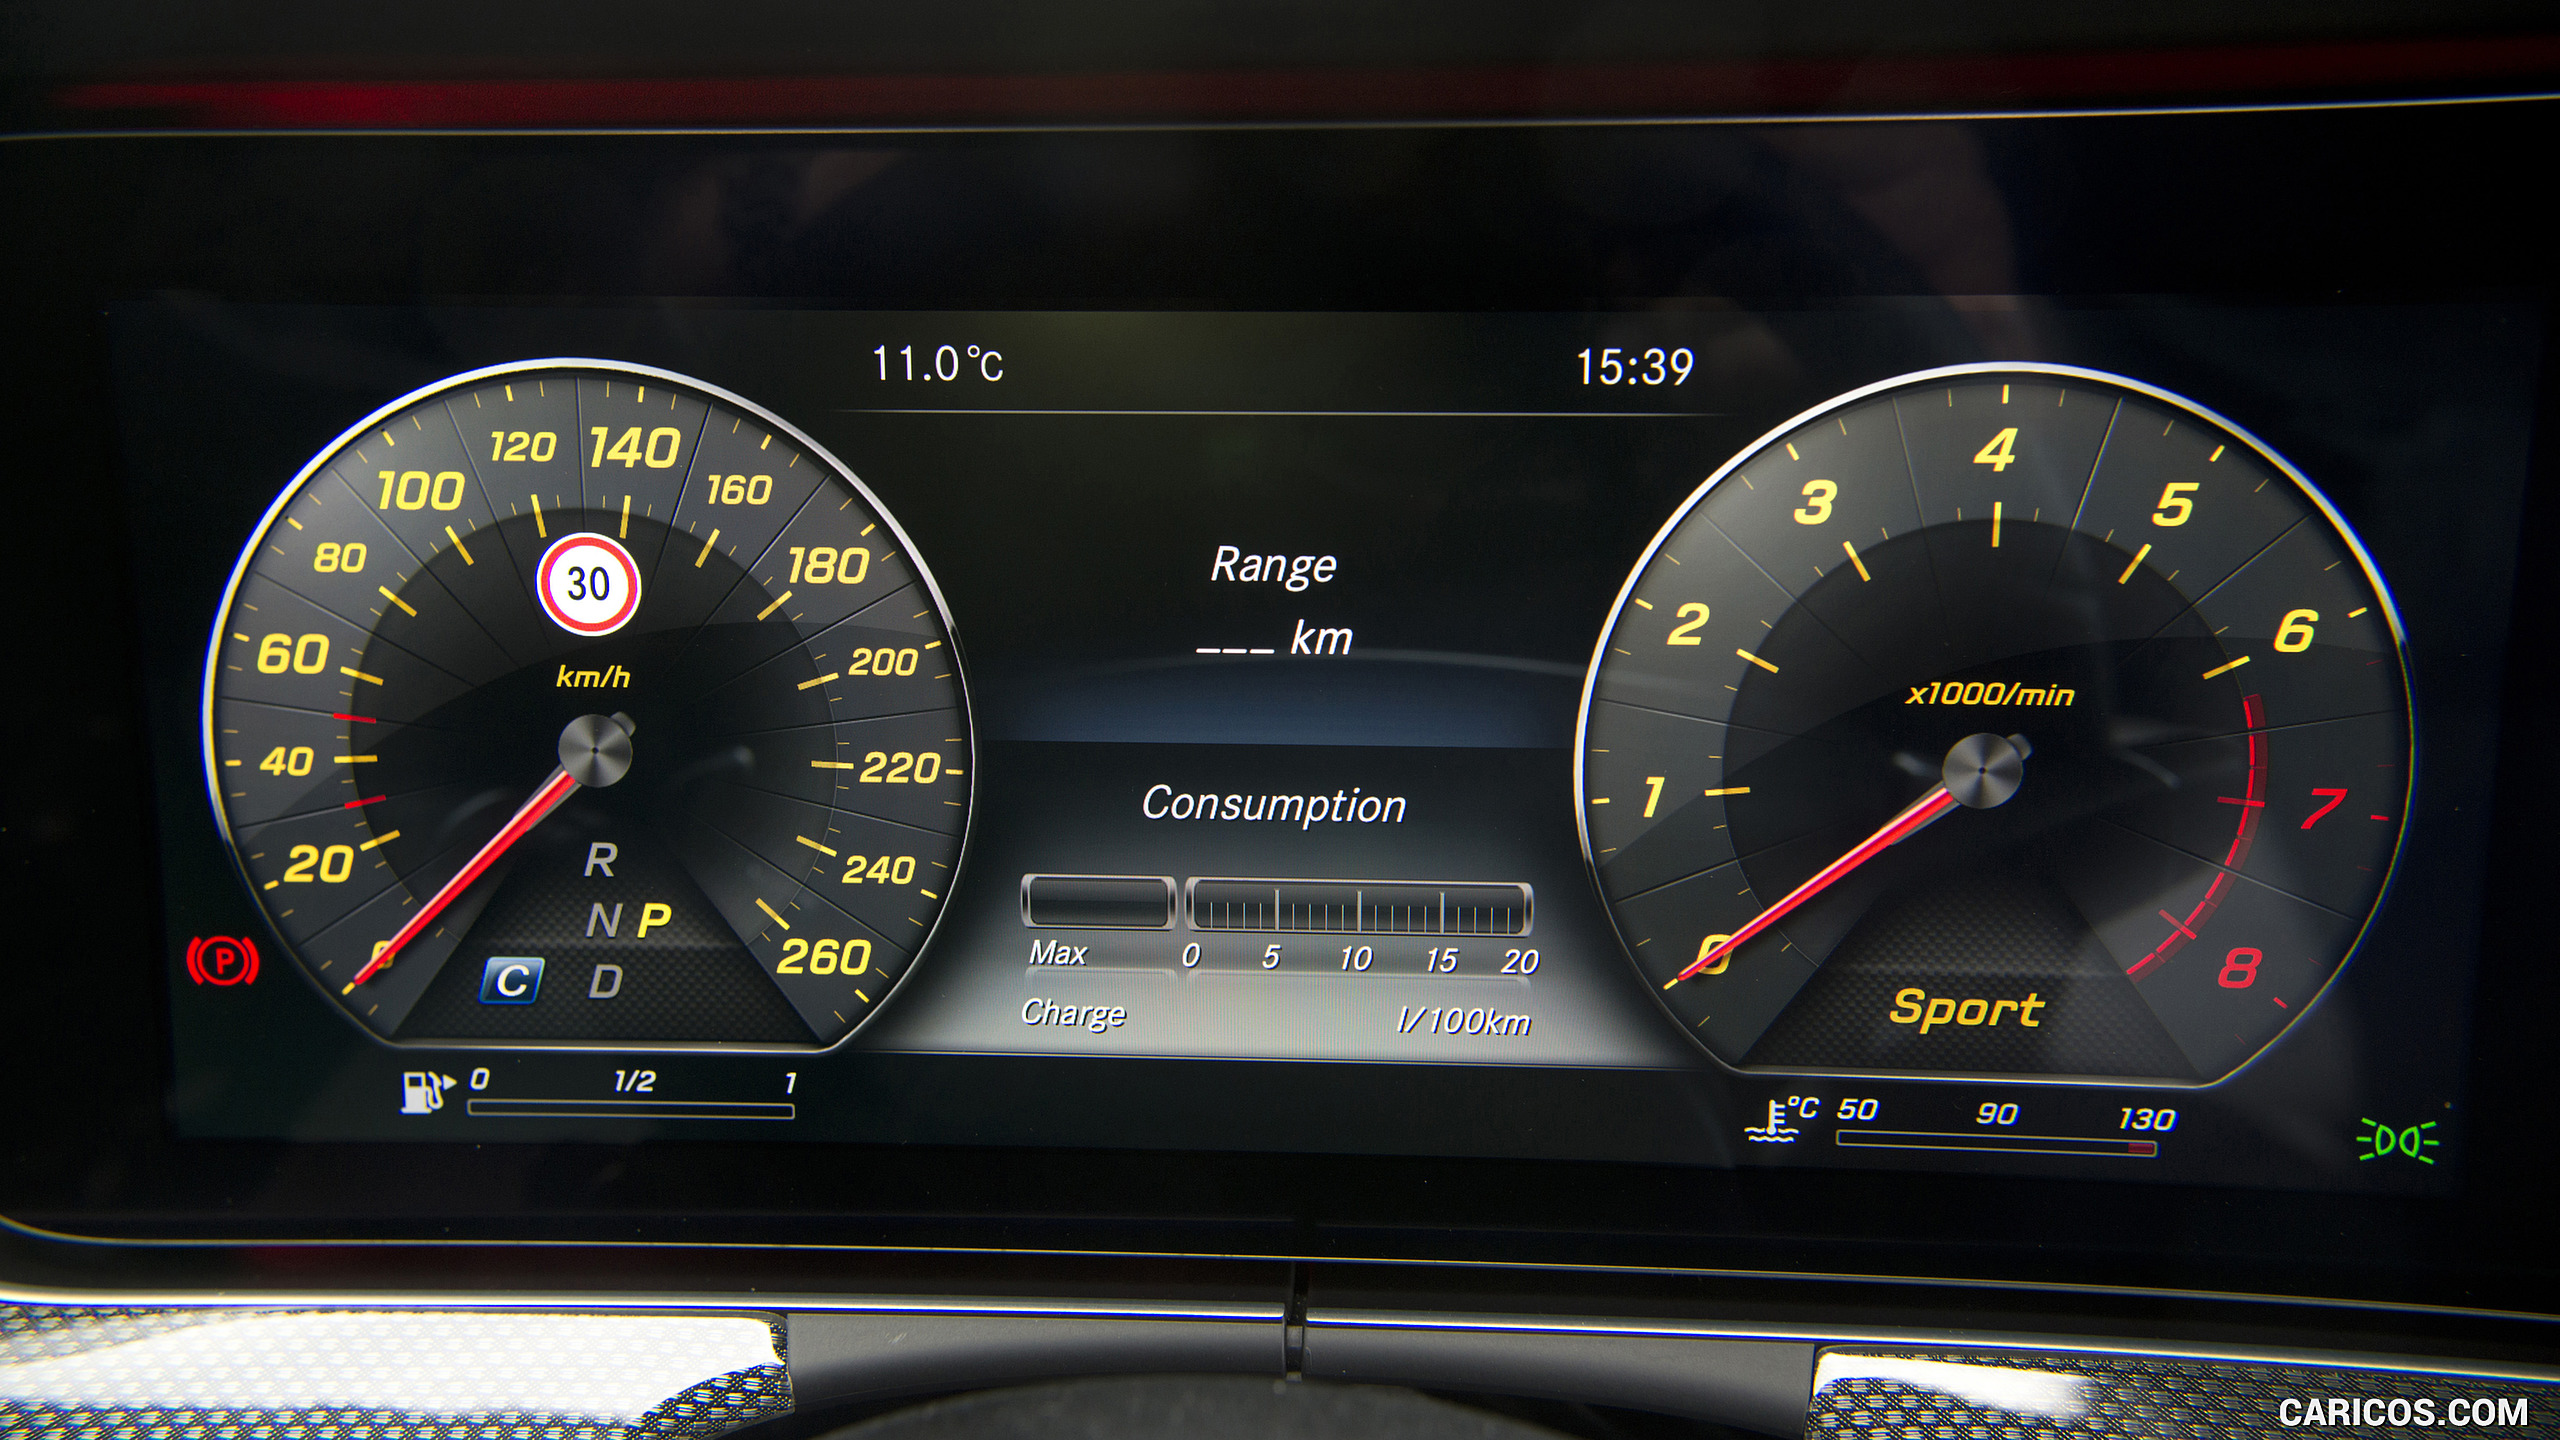 2018 Mercedes-Benz E400 Coupe 4MATIC - Digital Instrument Cluster, #158 of 365